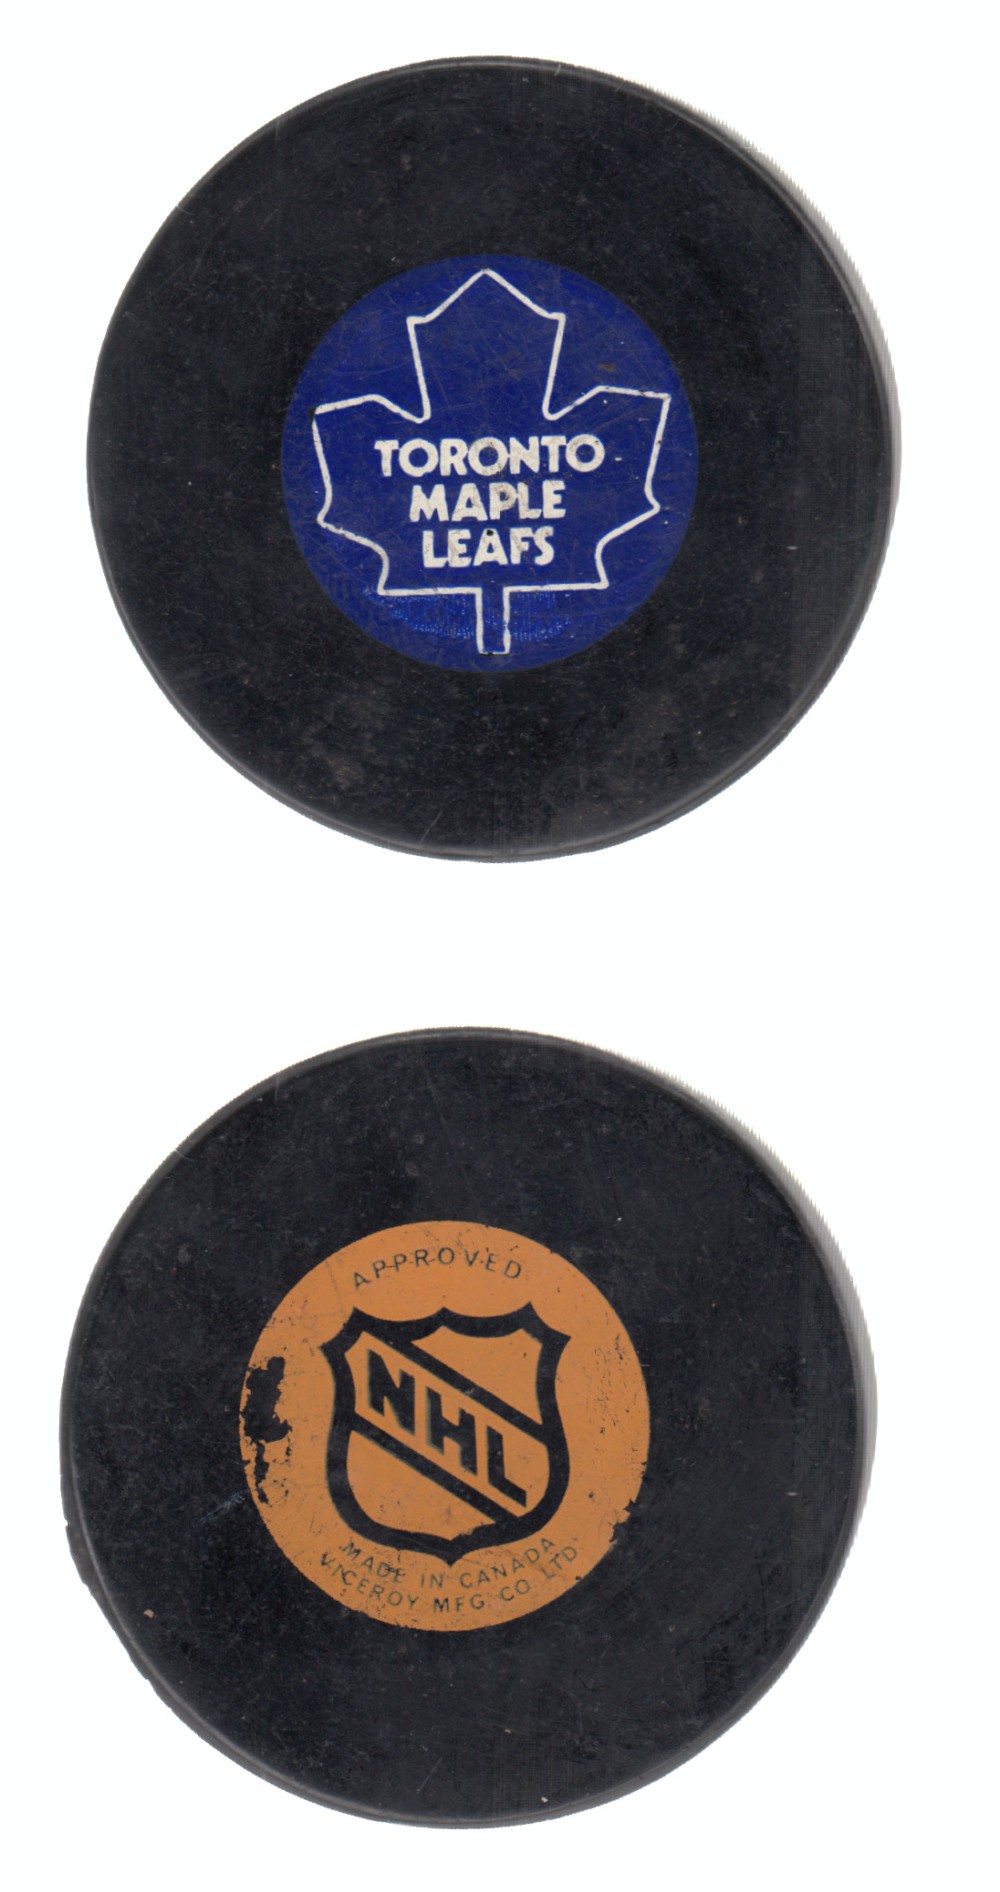 1977-79 VICEROY TORONTO MAPLE LEAFS GAME PUCK photo